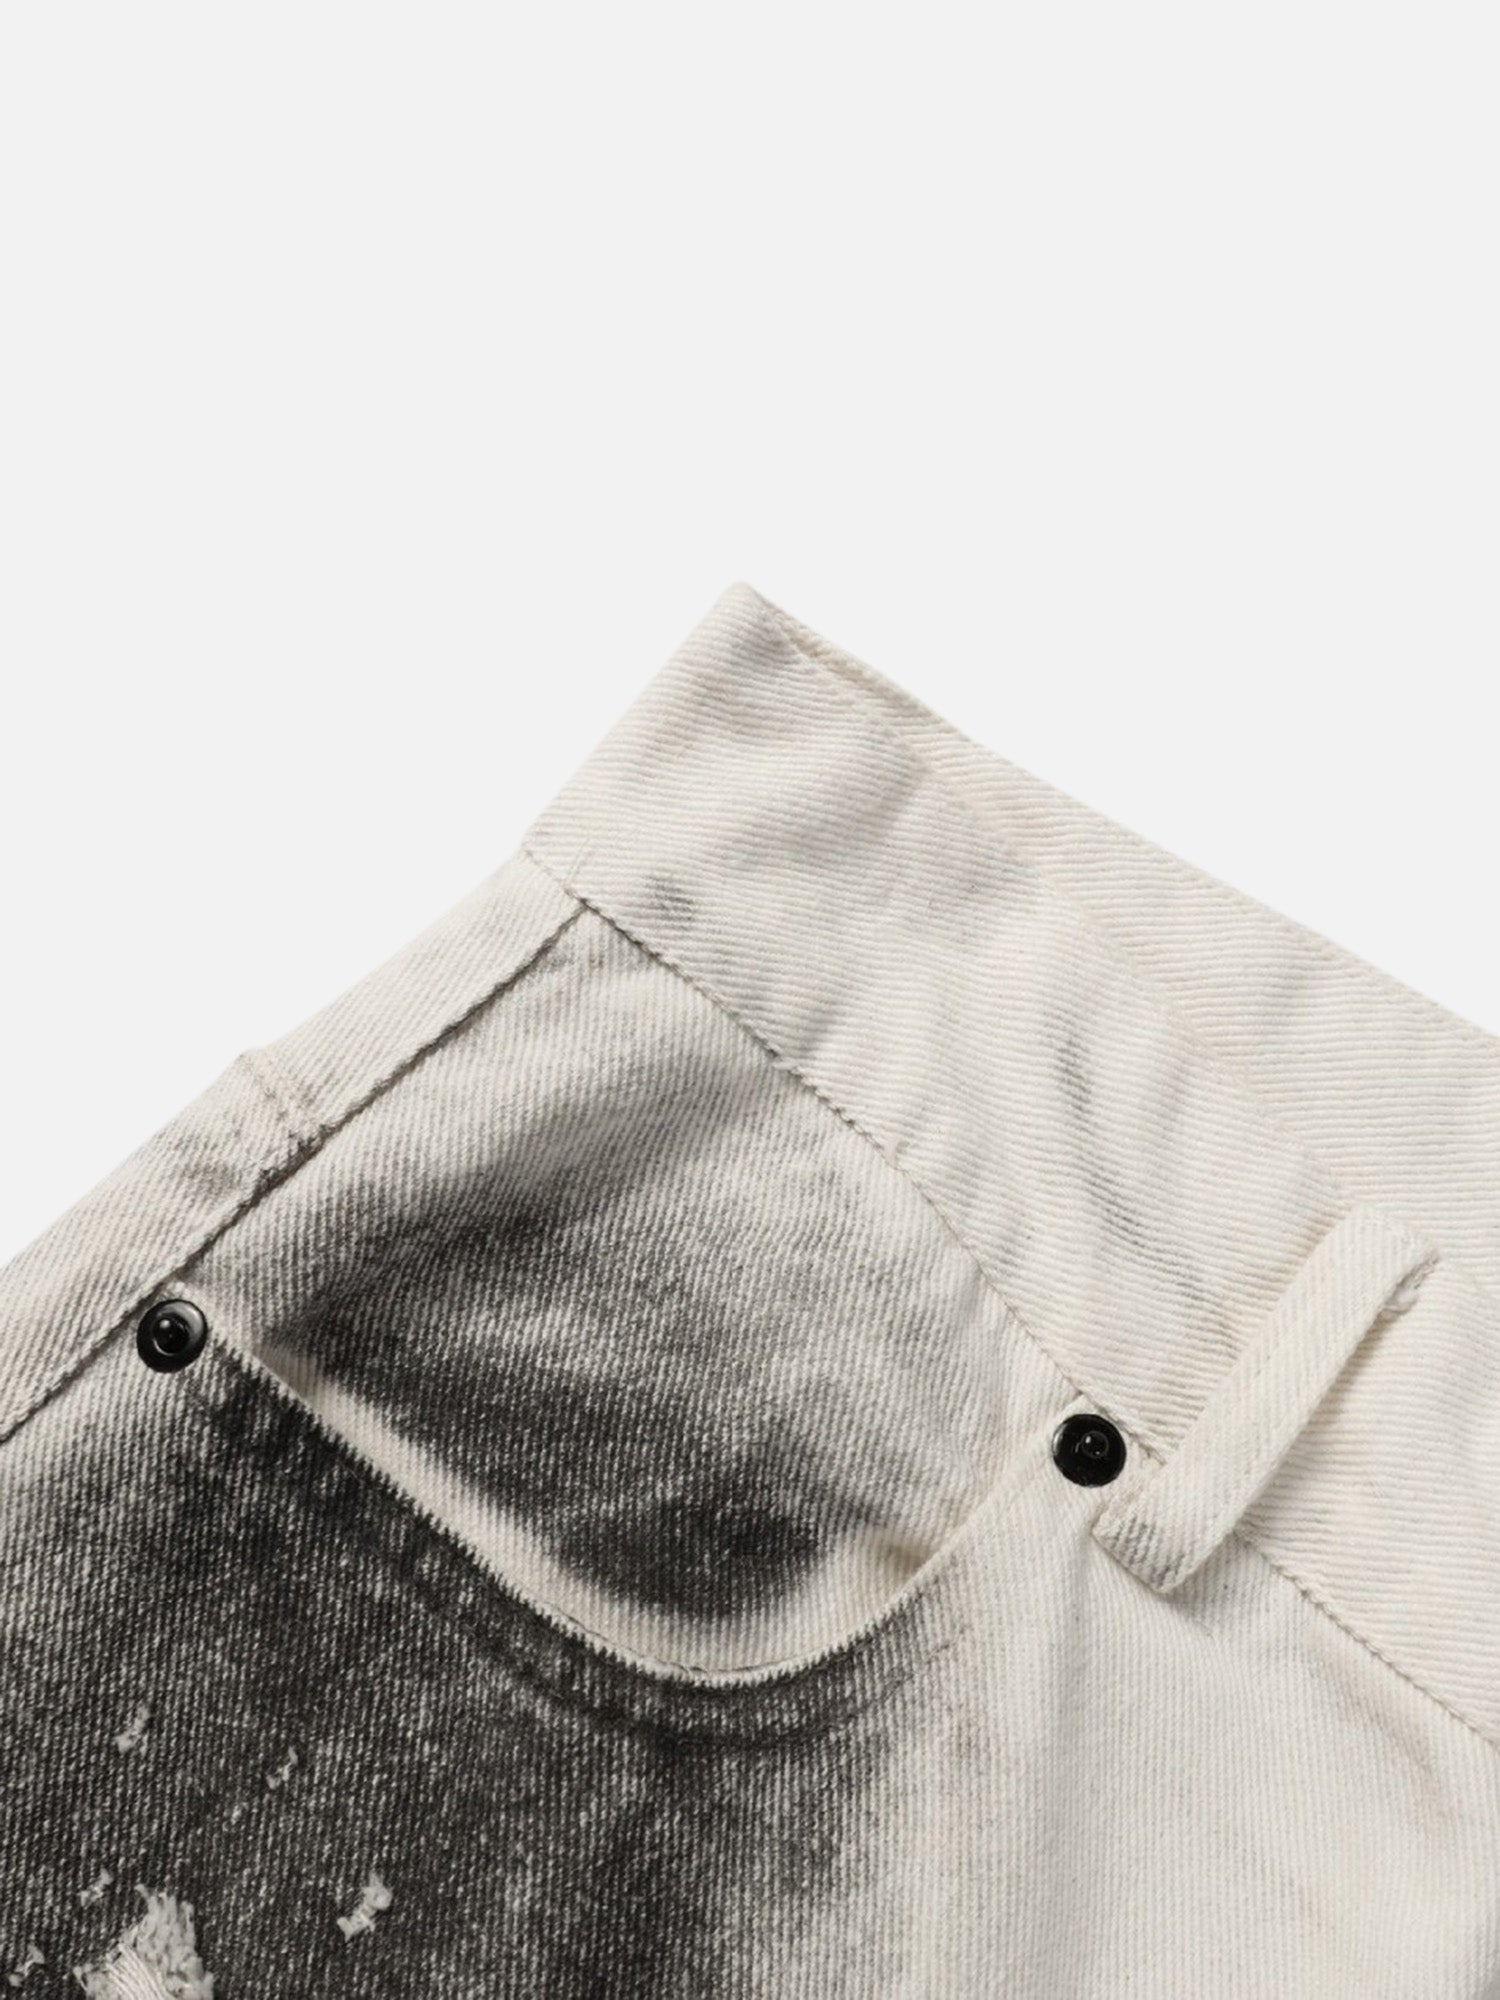 American Street Fashion Creative Design Washed Jeans